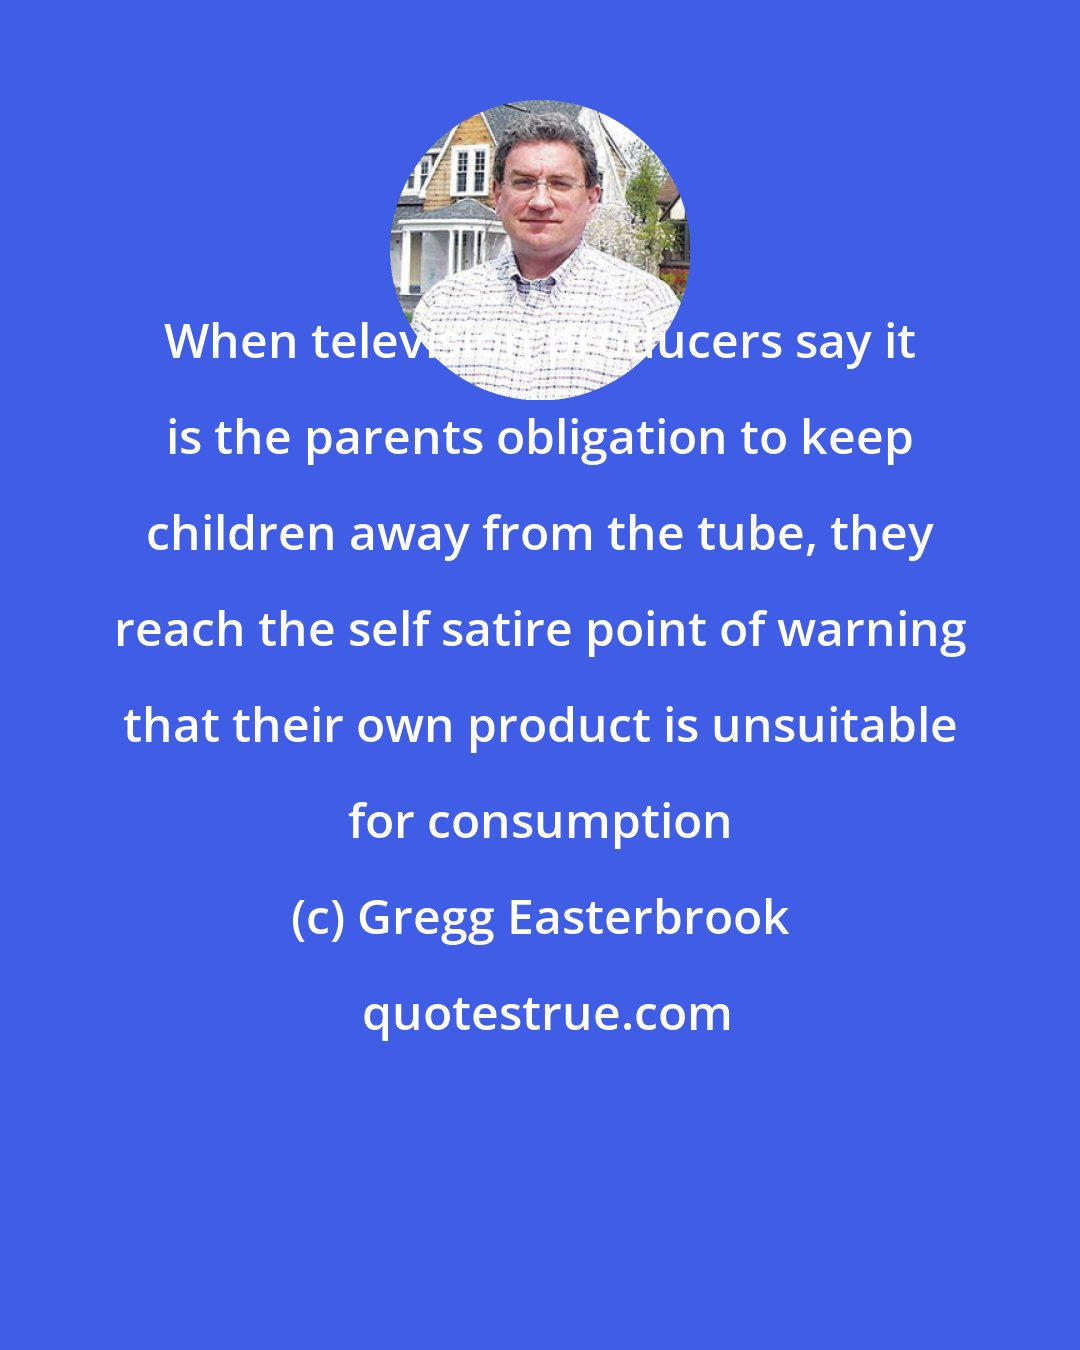 Gregg Easterbrook: When television producers say it is the parents obligation to keep children away from the tube, they reach the self satire point of warning that their own product is unsuitable for consumption